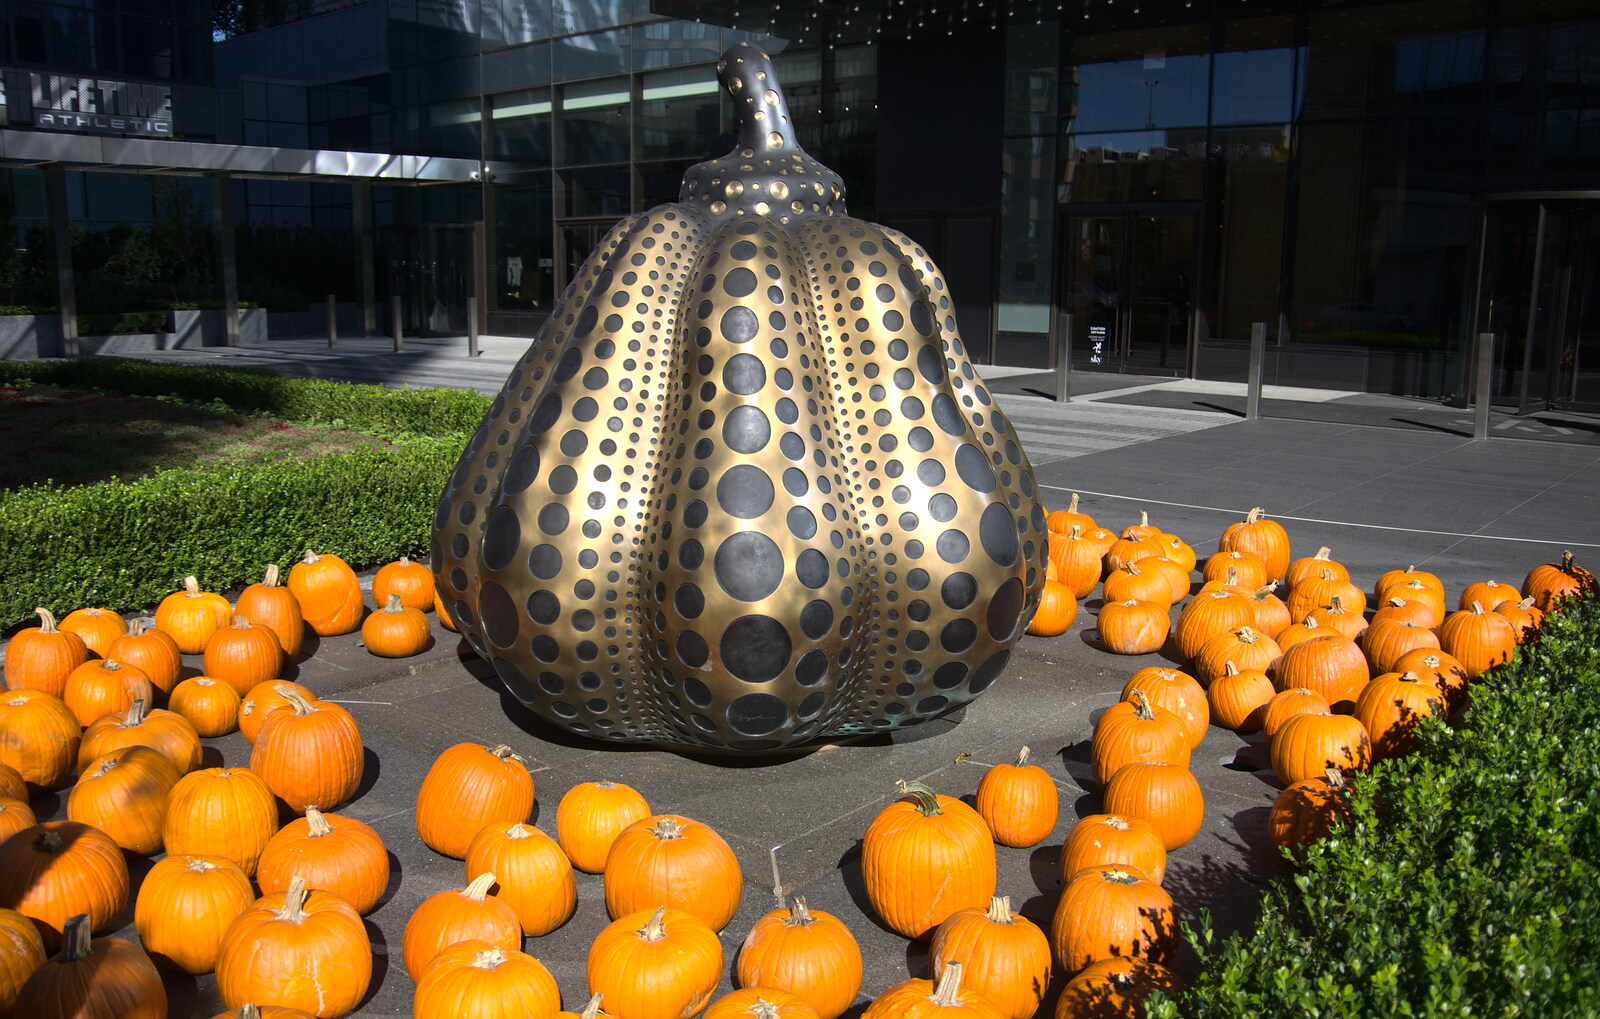 The pumpkin theme is certainly a Thing from Times Square, USS Intrepid and the High Line, Manhattan, New York - 25th October 2018